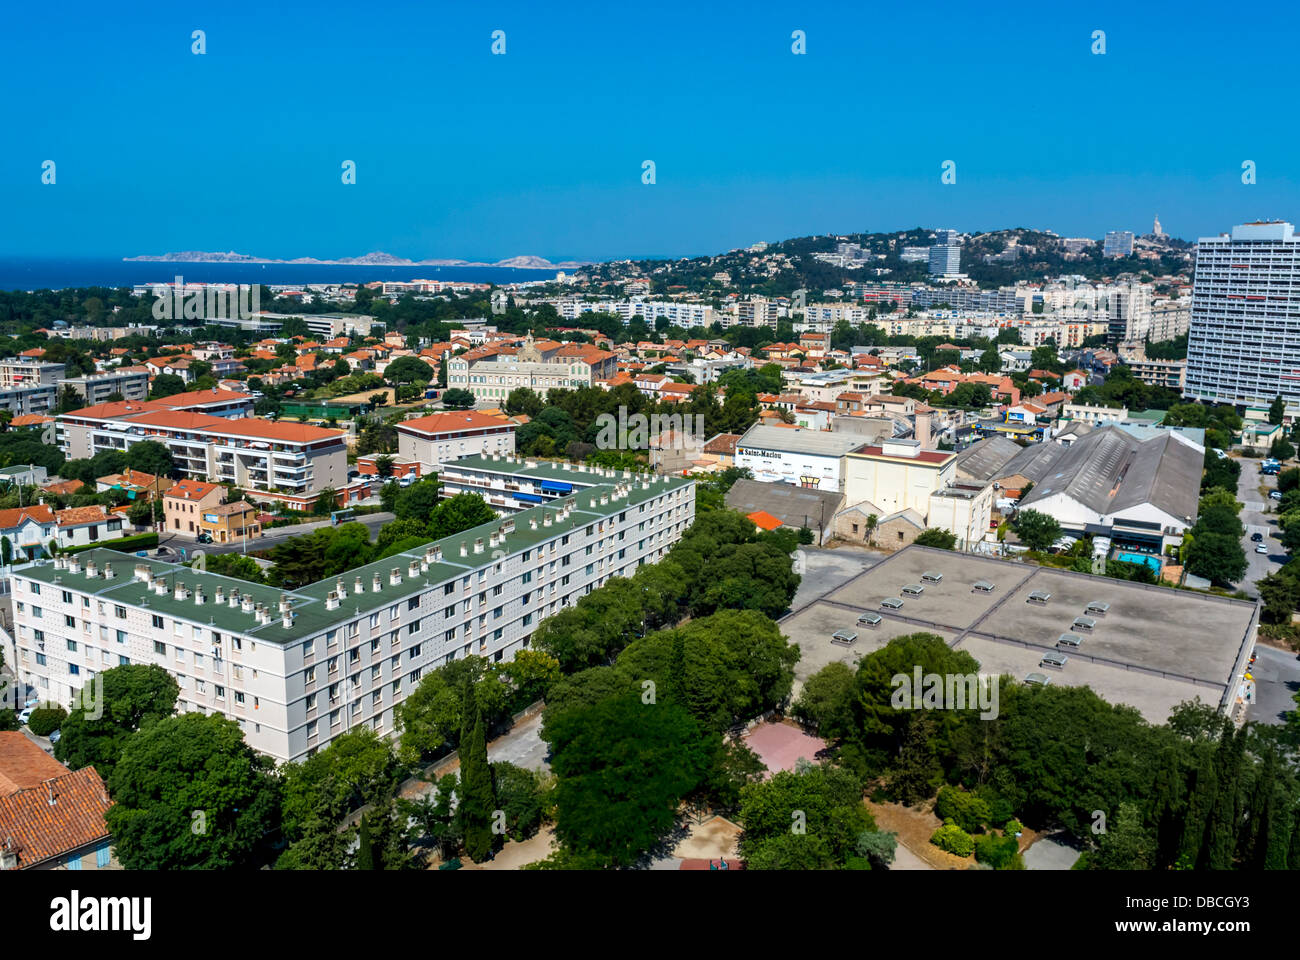 Marseille, France, Cityscape, Overview of City Buildings Stock Photo